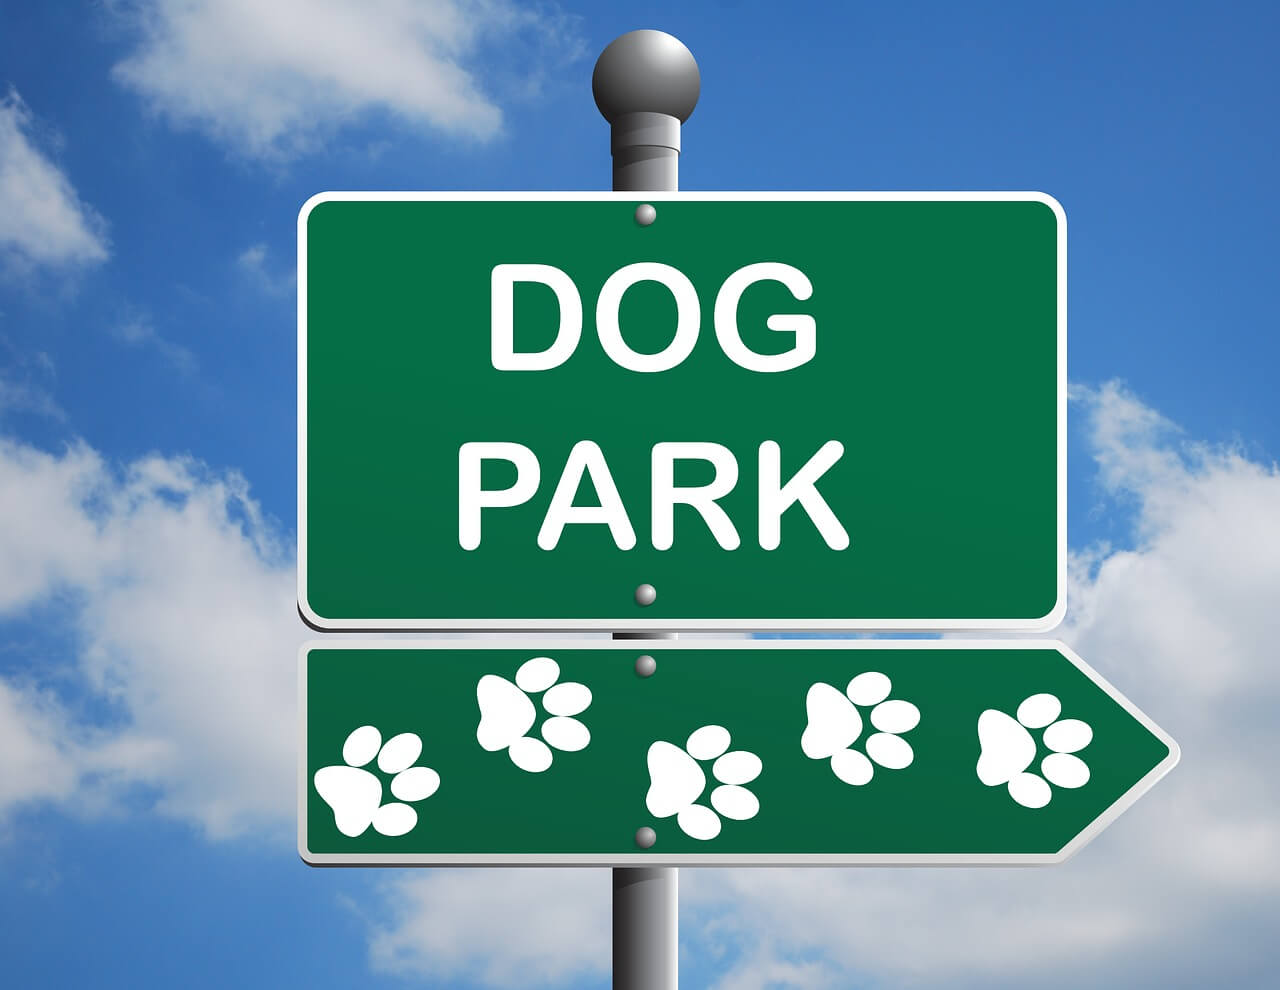 When can a puppy go to a dog park?